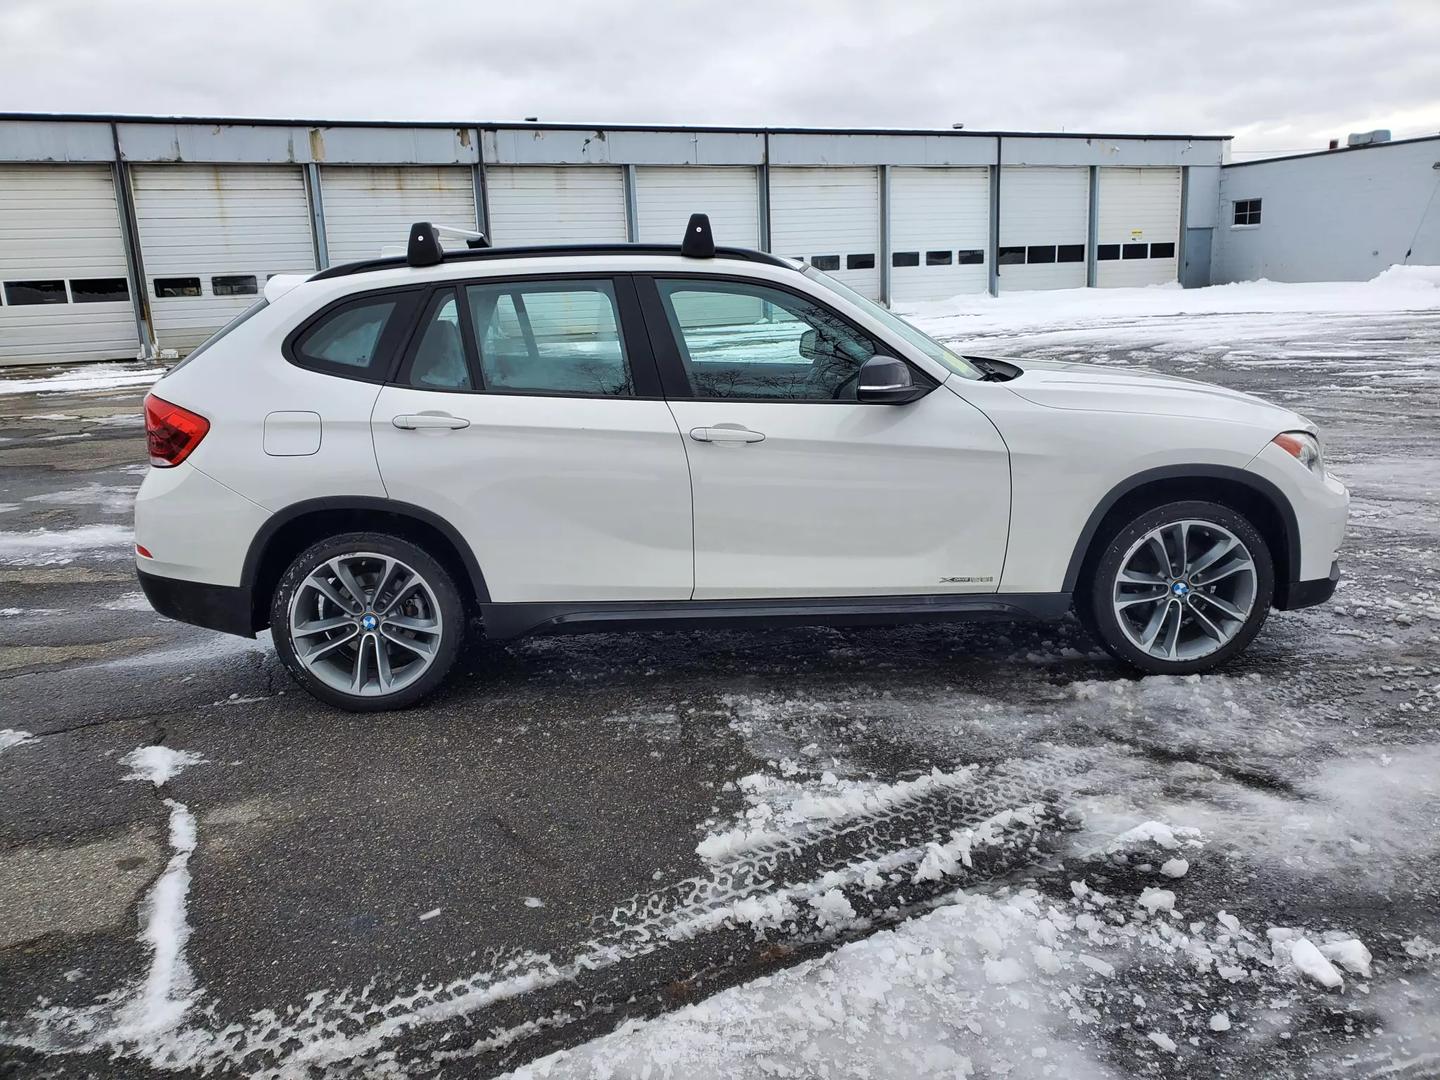 USED BMW X1 2014 for sale in Worcester, MA Interauto